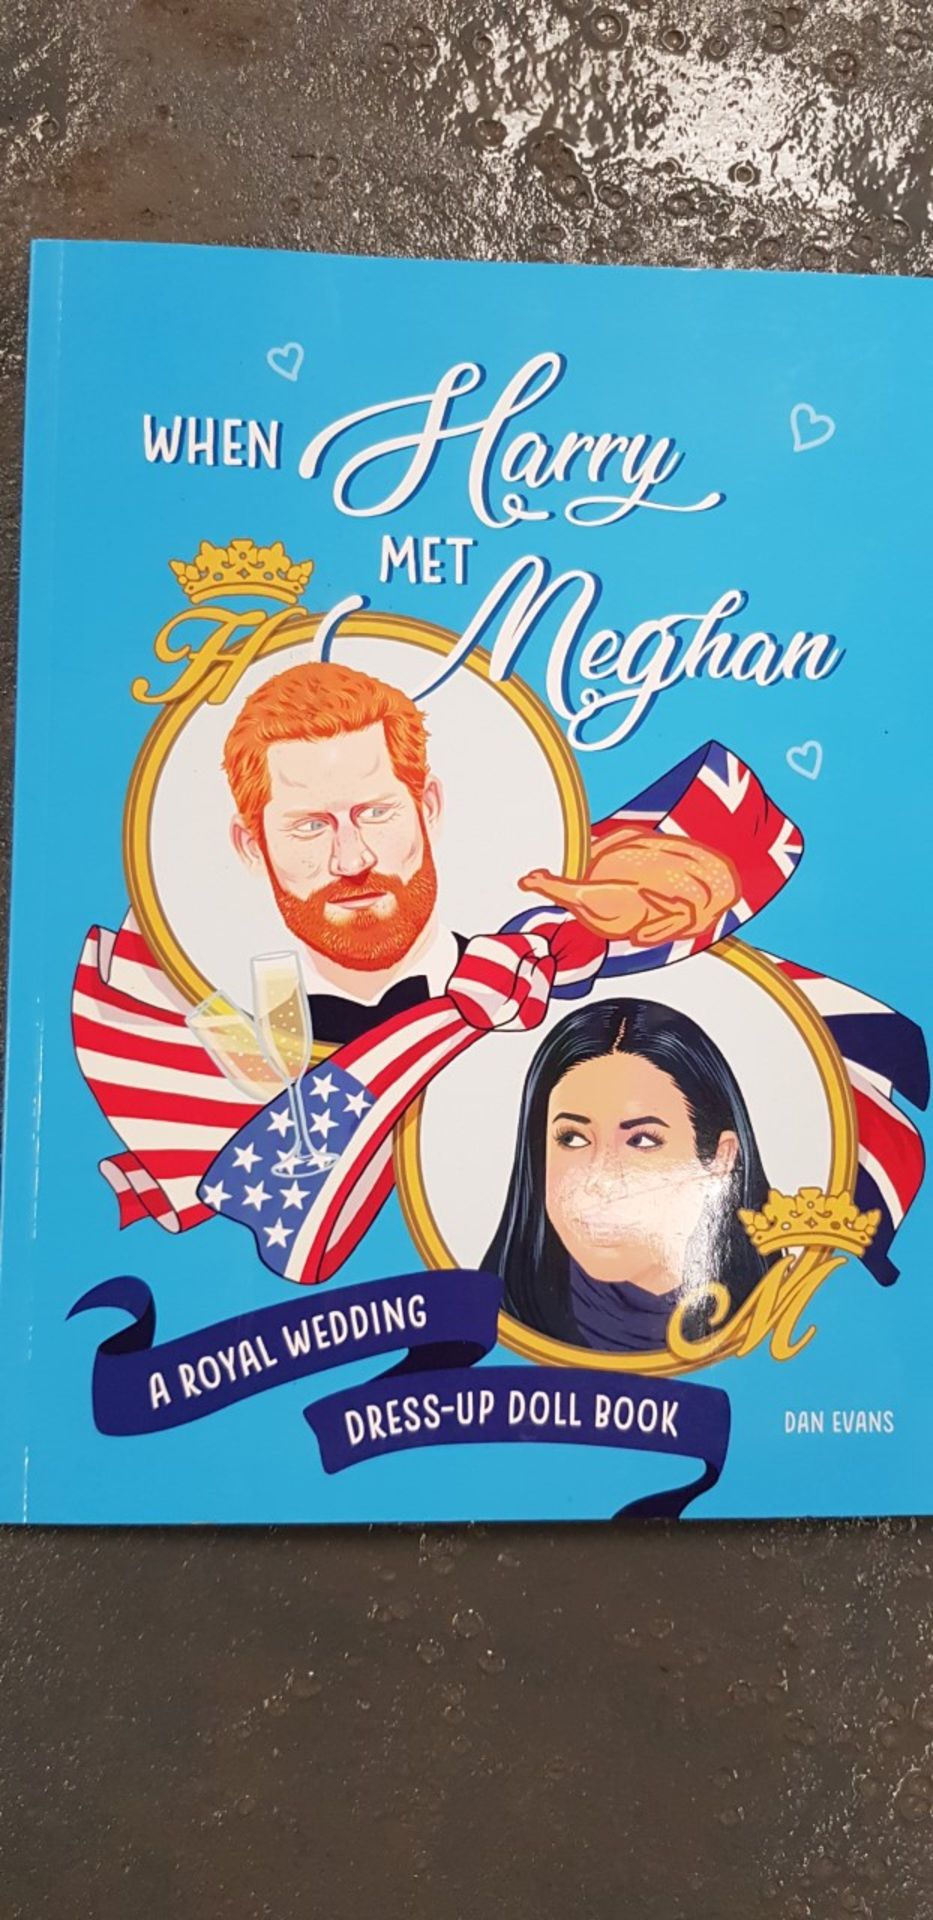 100 When Harry met Meghan A Royal wedding dress up doll book - Image 3 of 4